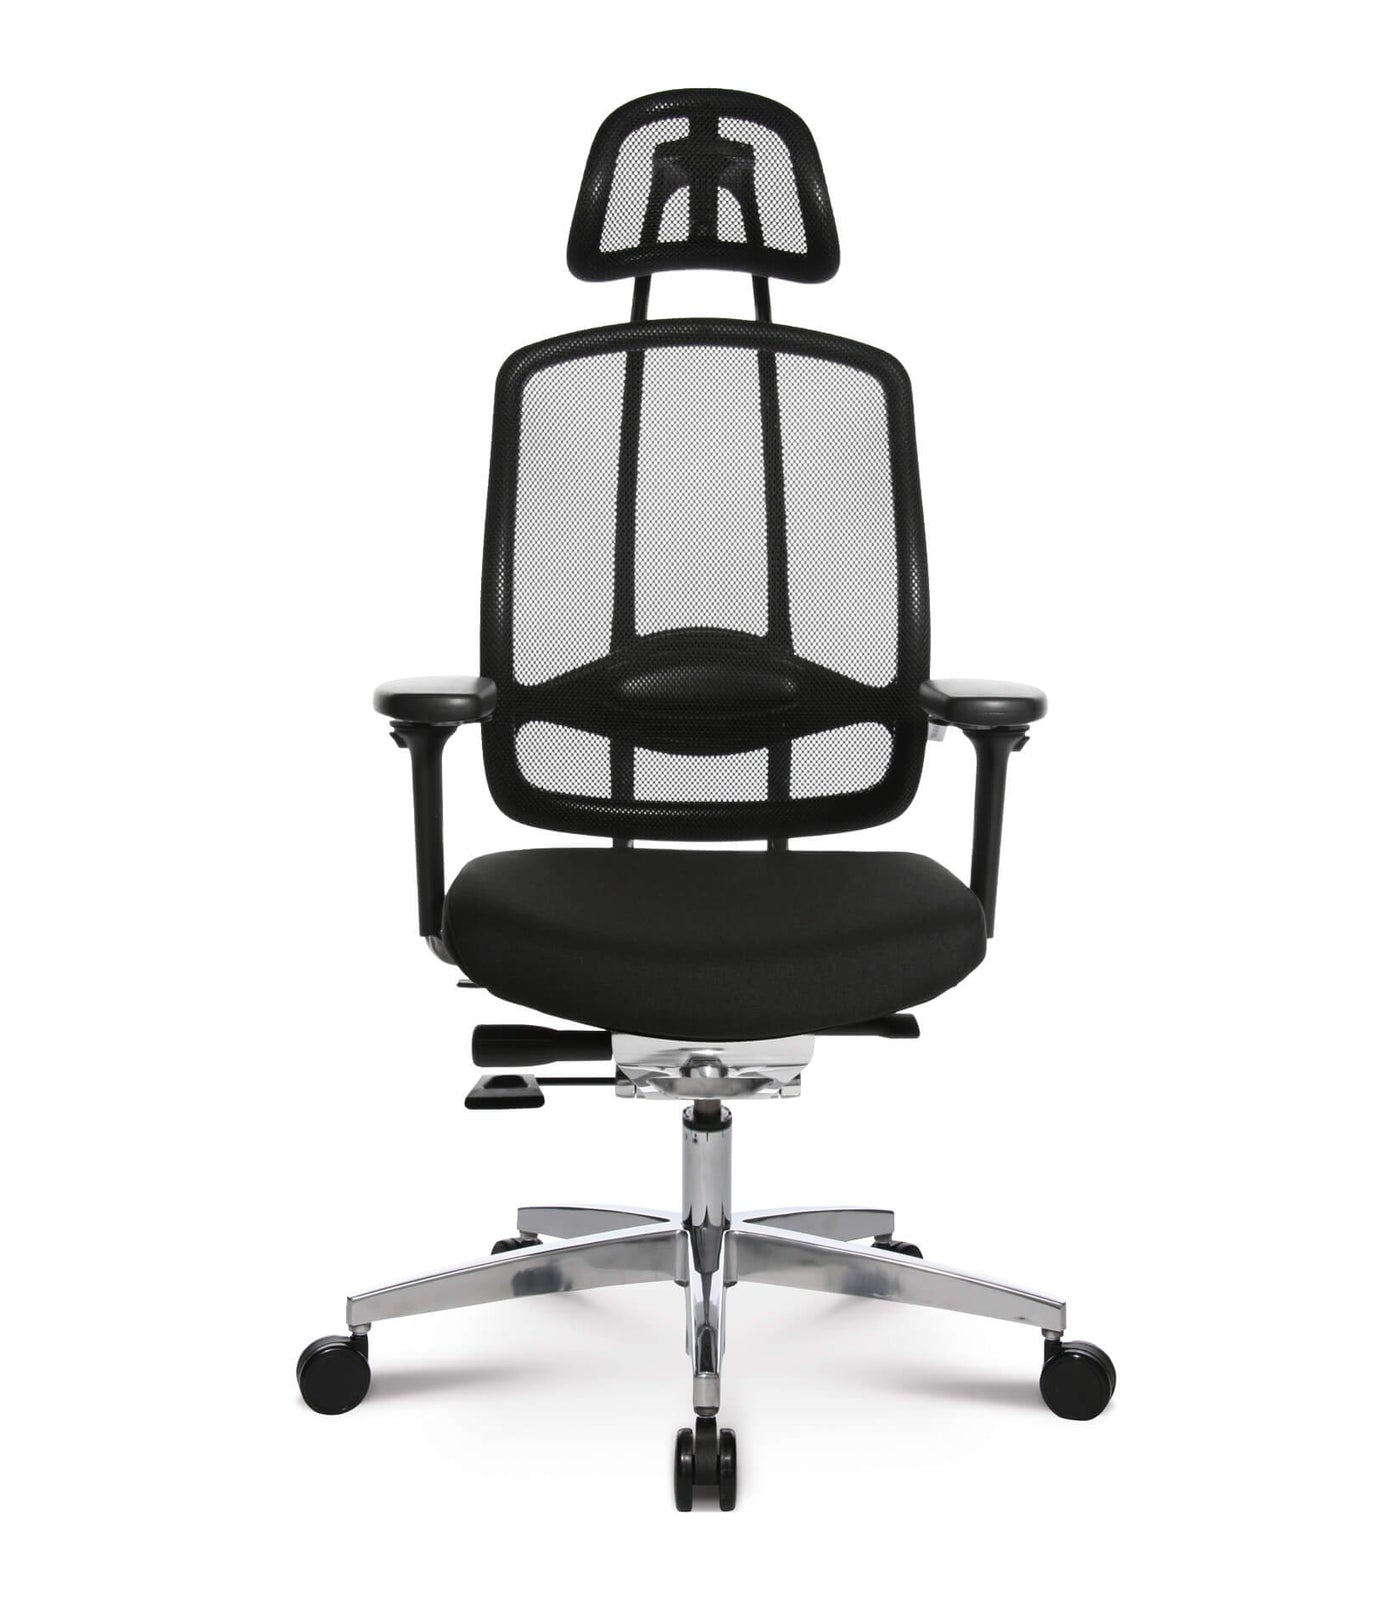 Wagner - AluMedic 10 Chefsessel - OFFICE CHAIRS - 123HomeOffice